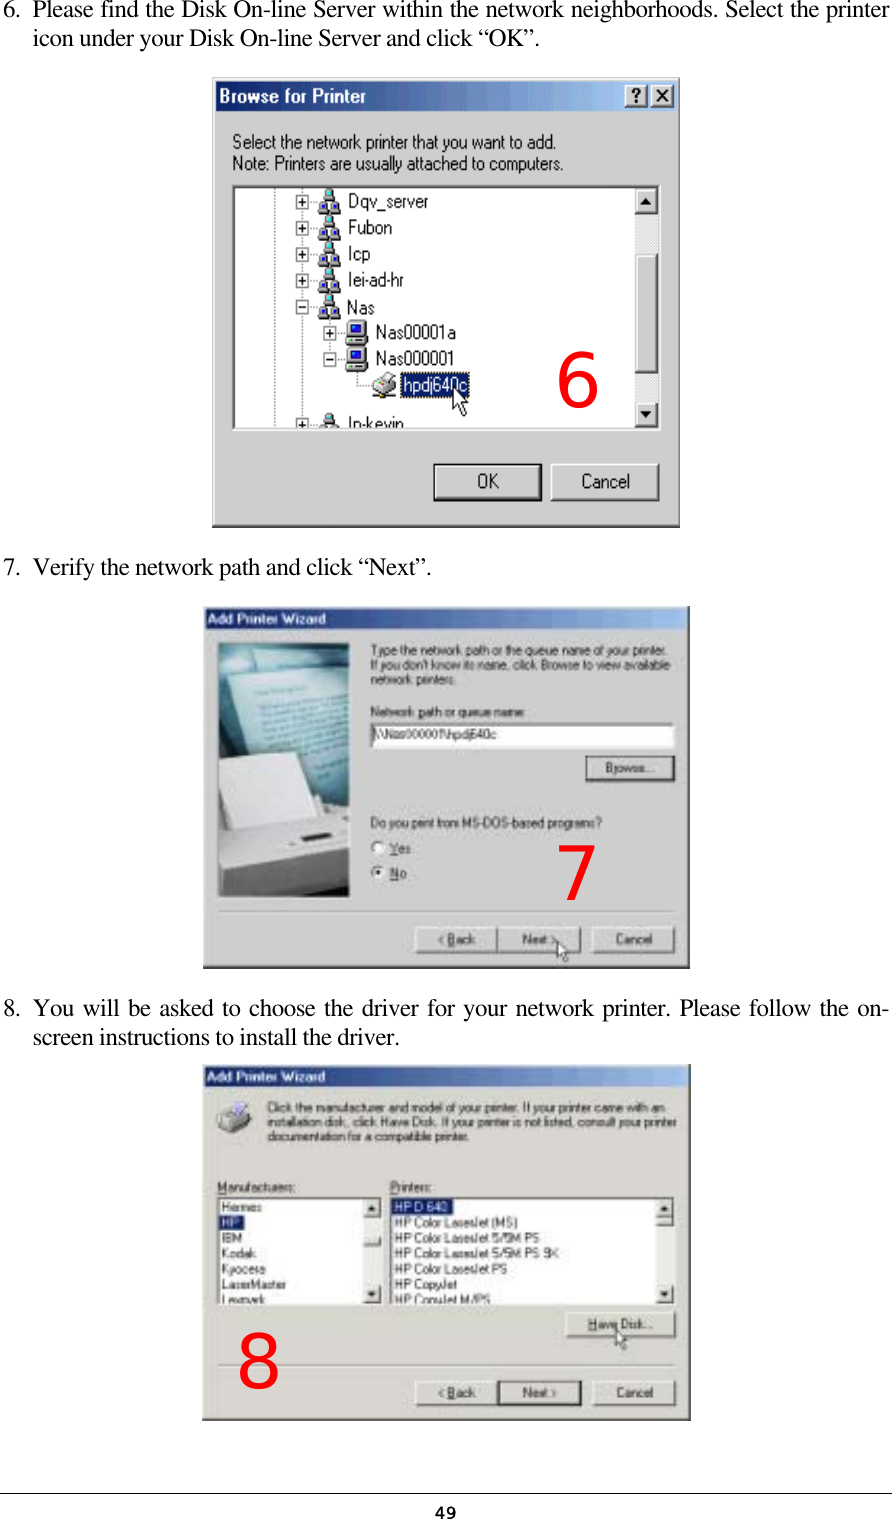   496.  Please find the Disk On-line Server within the network neighborhoods. Select the printer icon under your Disk On-line Server and click “OK”.  7.  Verify the network path and click “Next”.  8. You will be asked to choose the driver for your network printer. Please follow the on-screen instructions to install the driver.    7 6 8 